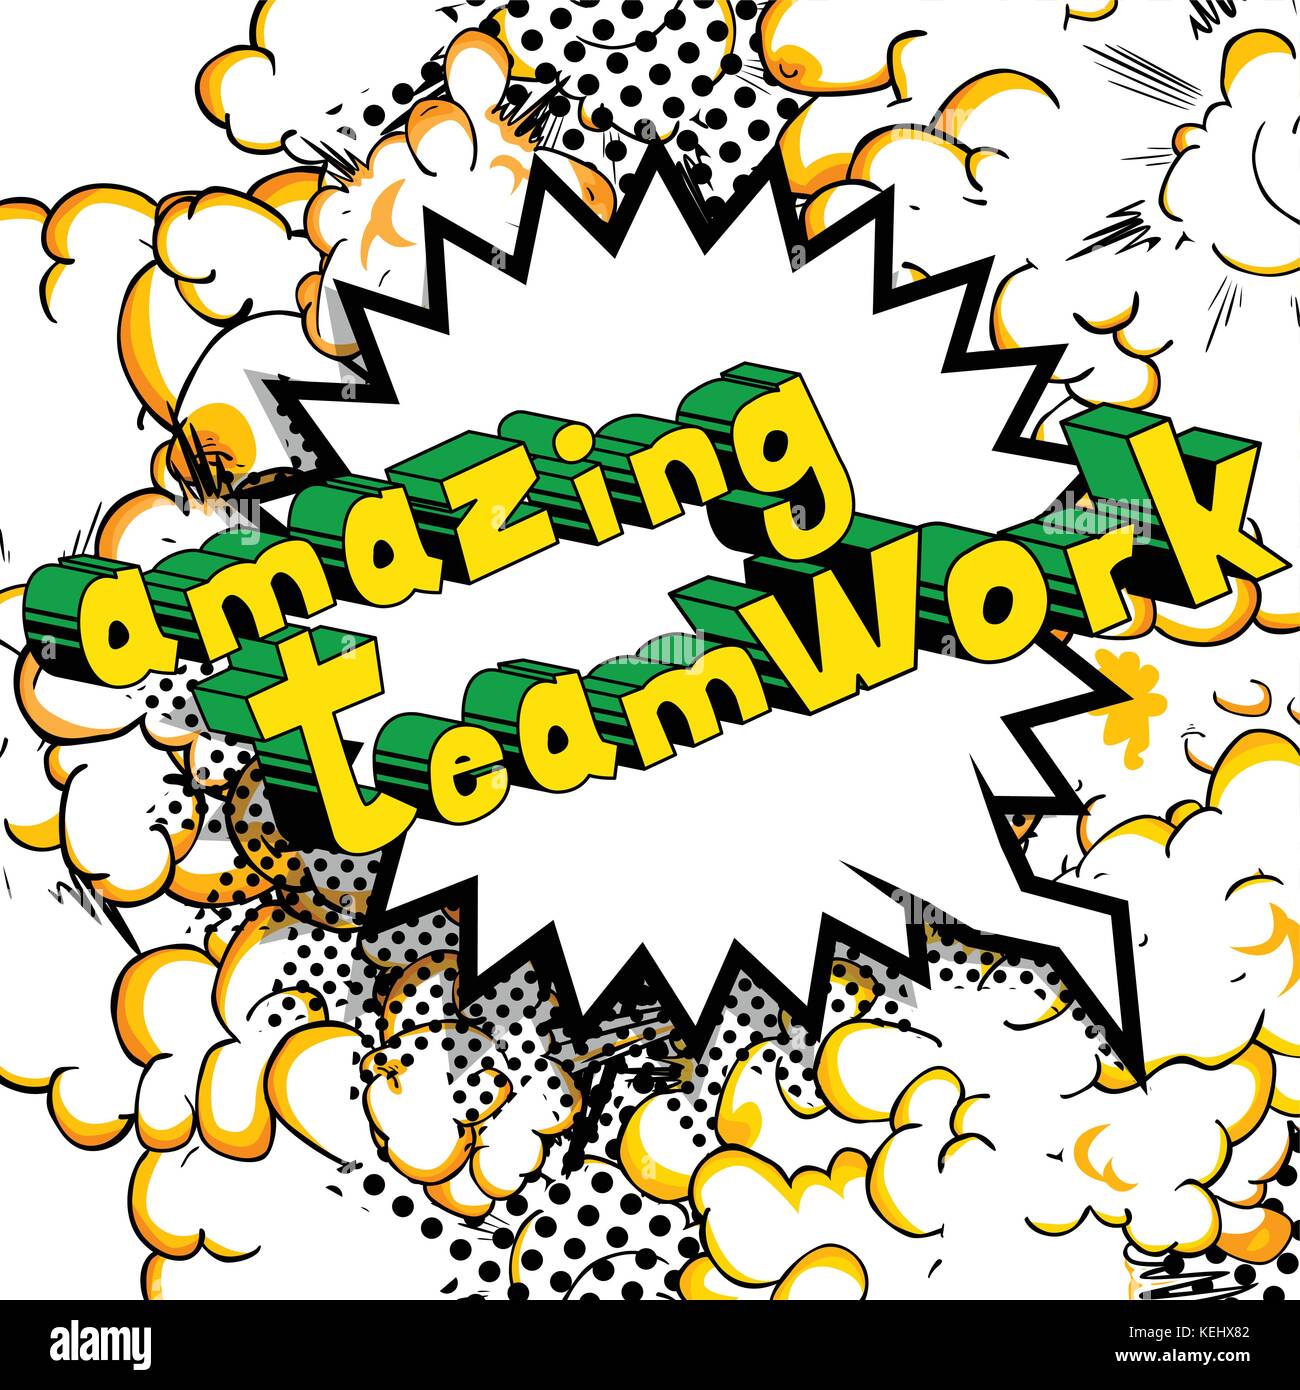 Amazing Teamwork - Comic book style phrase on abstract background. Stock Vector